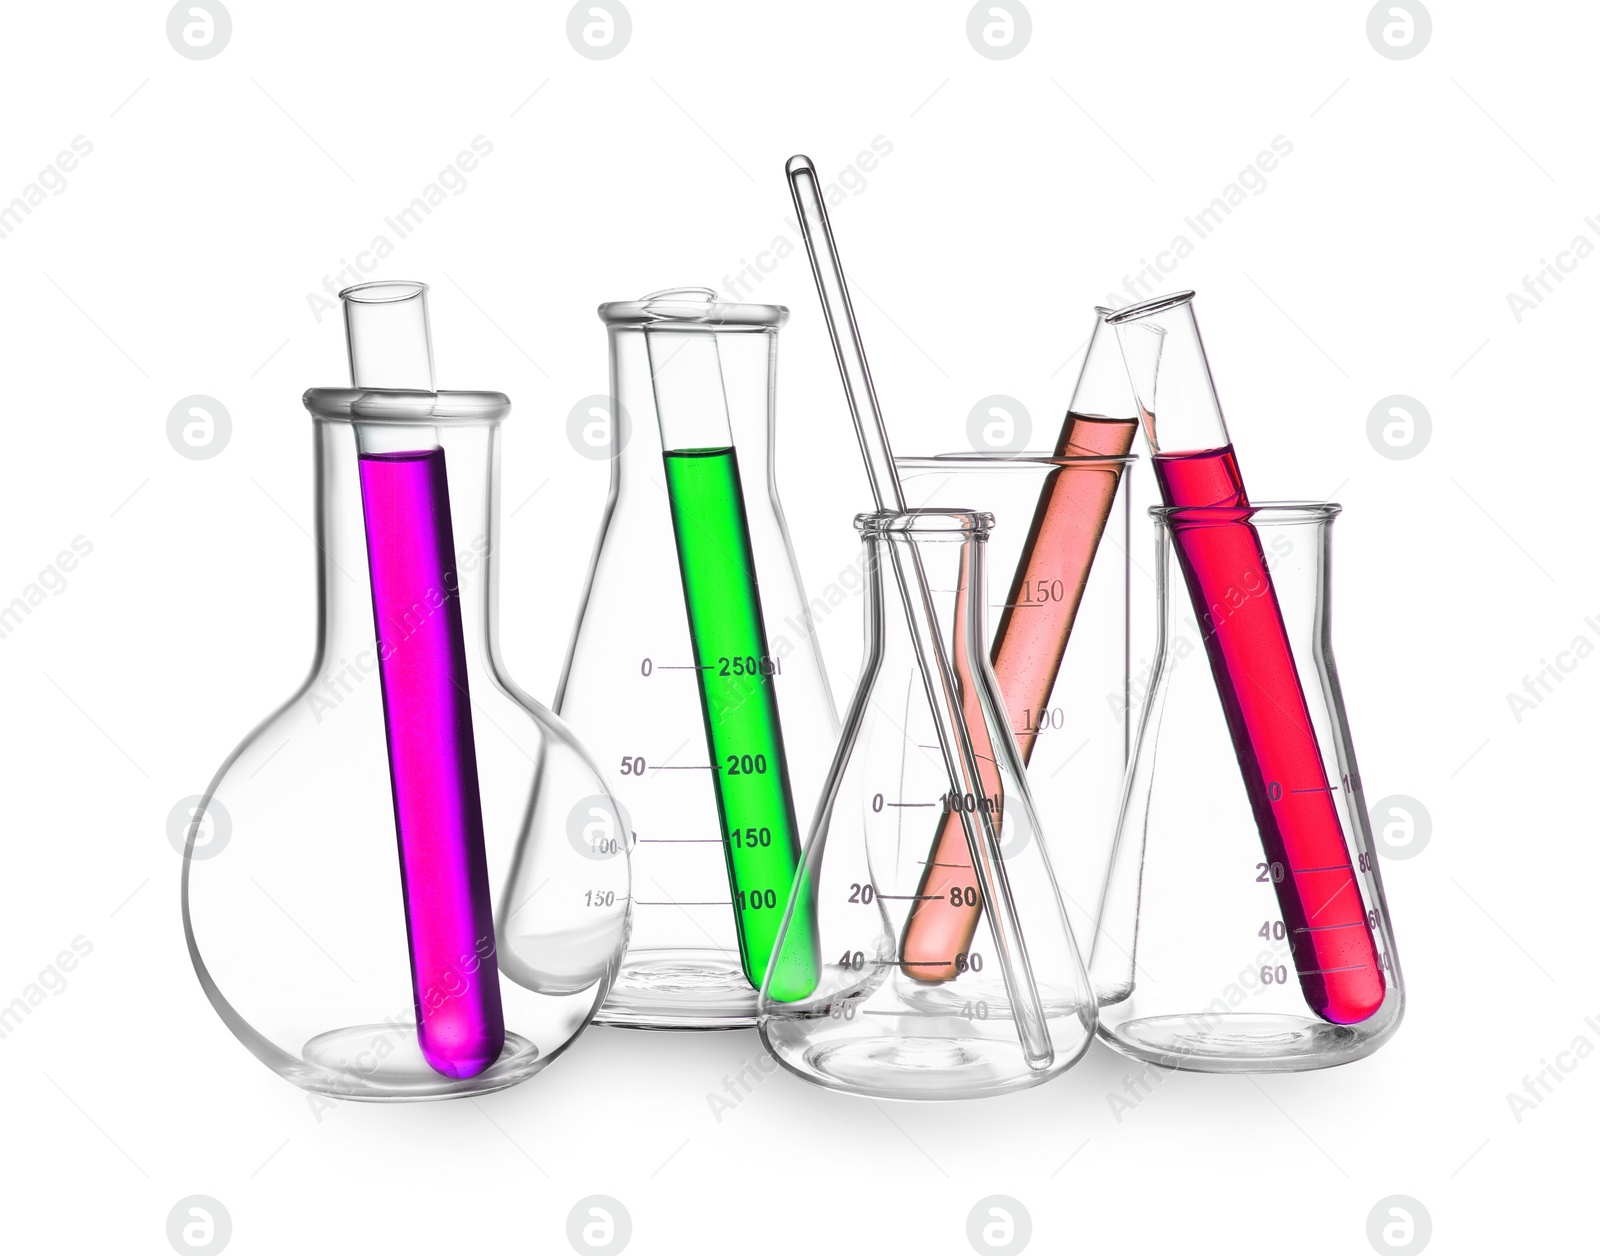 Image of Glass flasks, beaker and test tubes with colorful liquids isolated on white